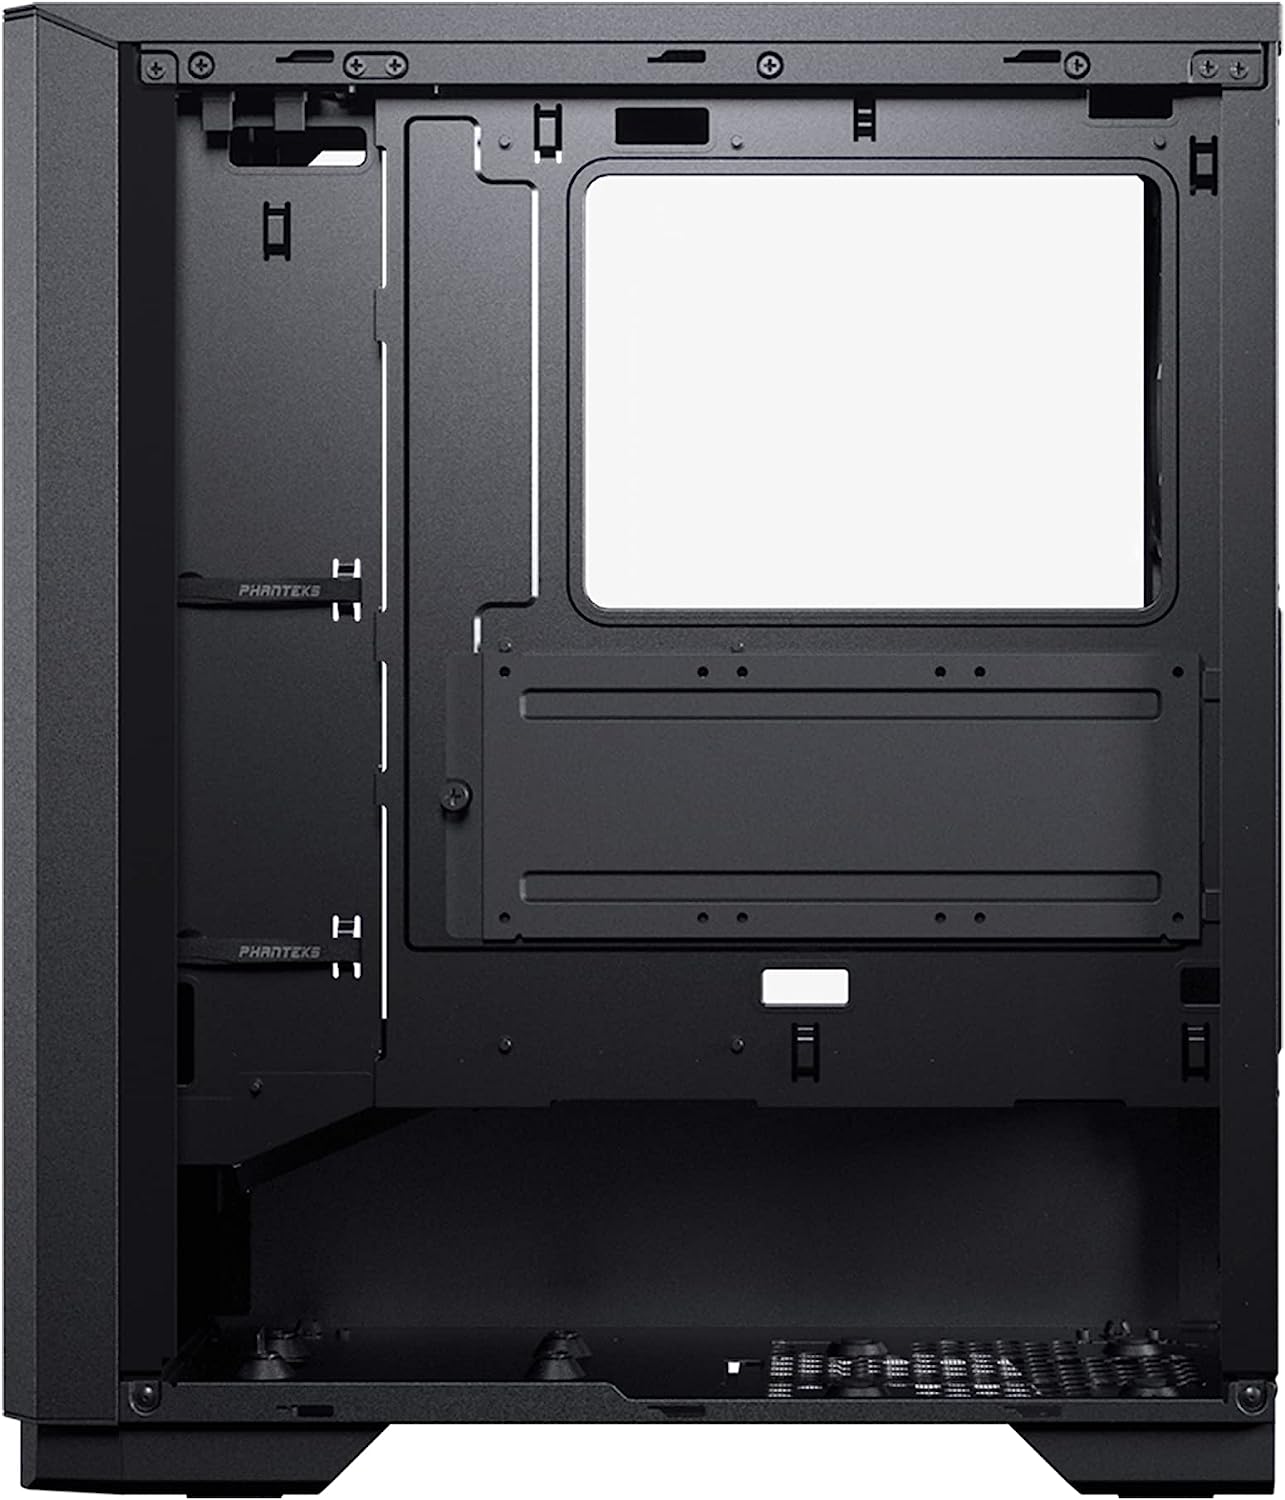 Phanteks does it again! NV7 and Eclipse G300A Cases 